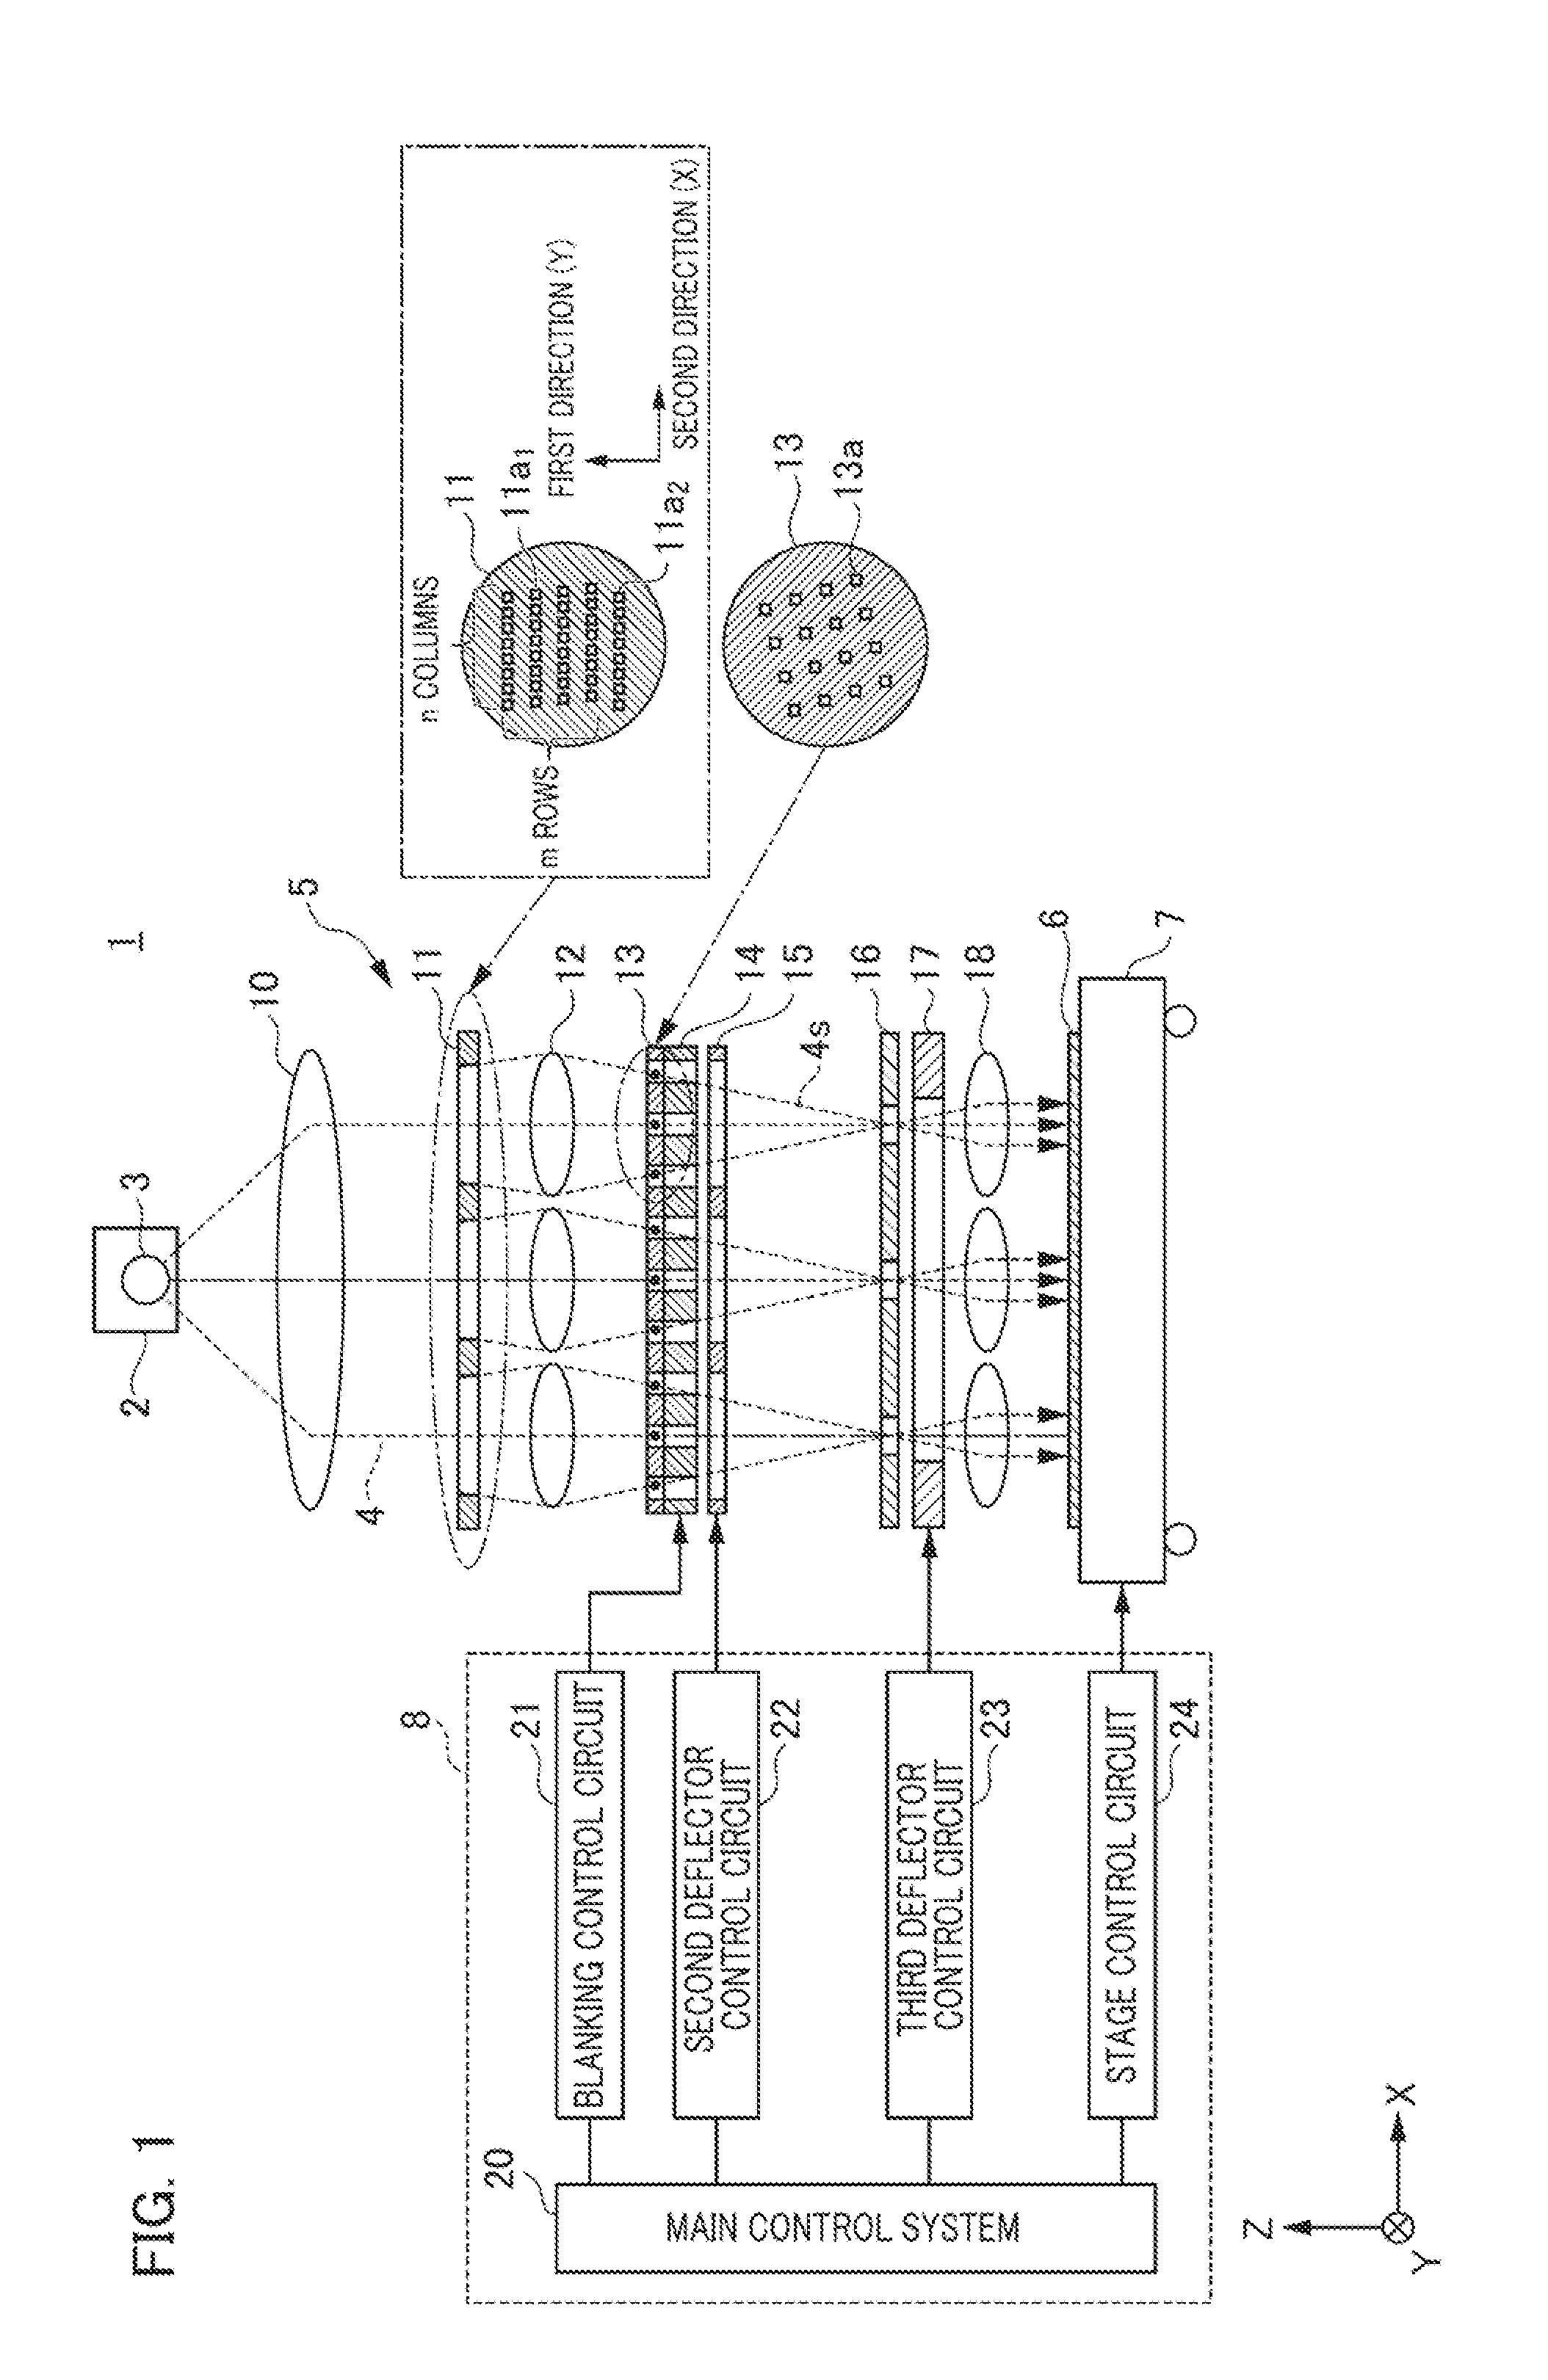 Lithography apparatus, and method of manufacture of product